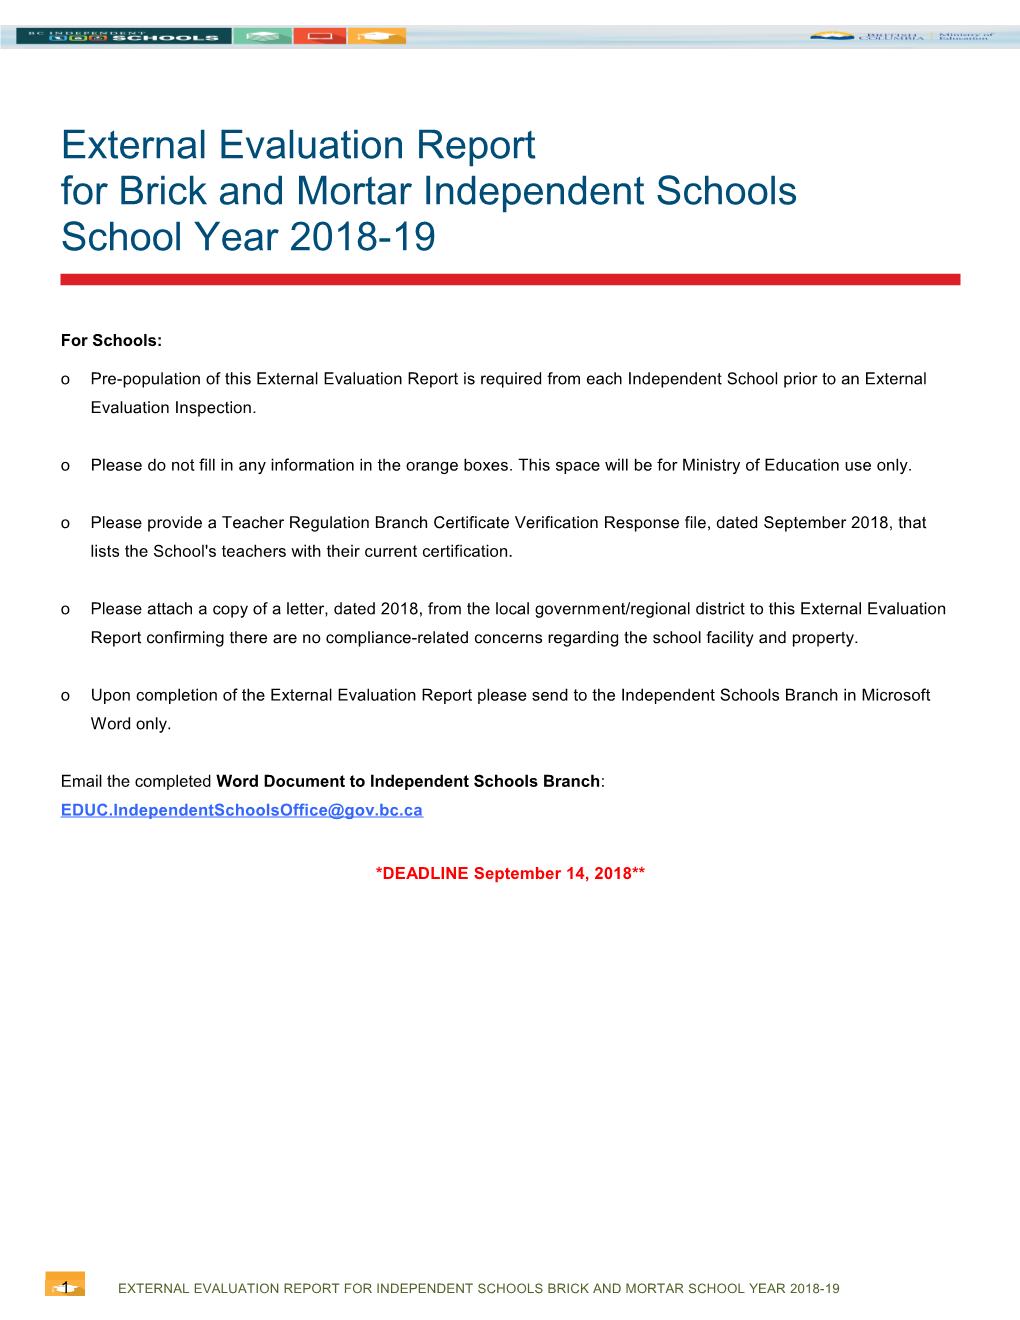 External Evaluation Report for Brick and Mortar Independent Schools School Year 2018-19